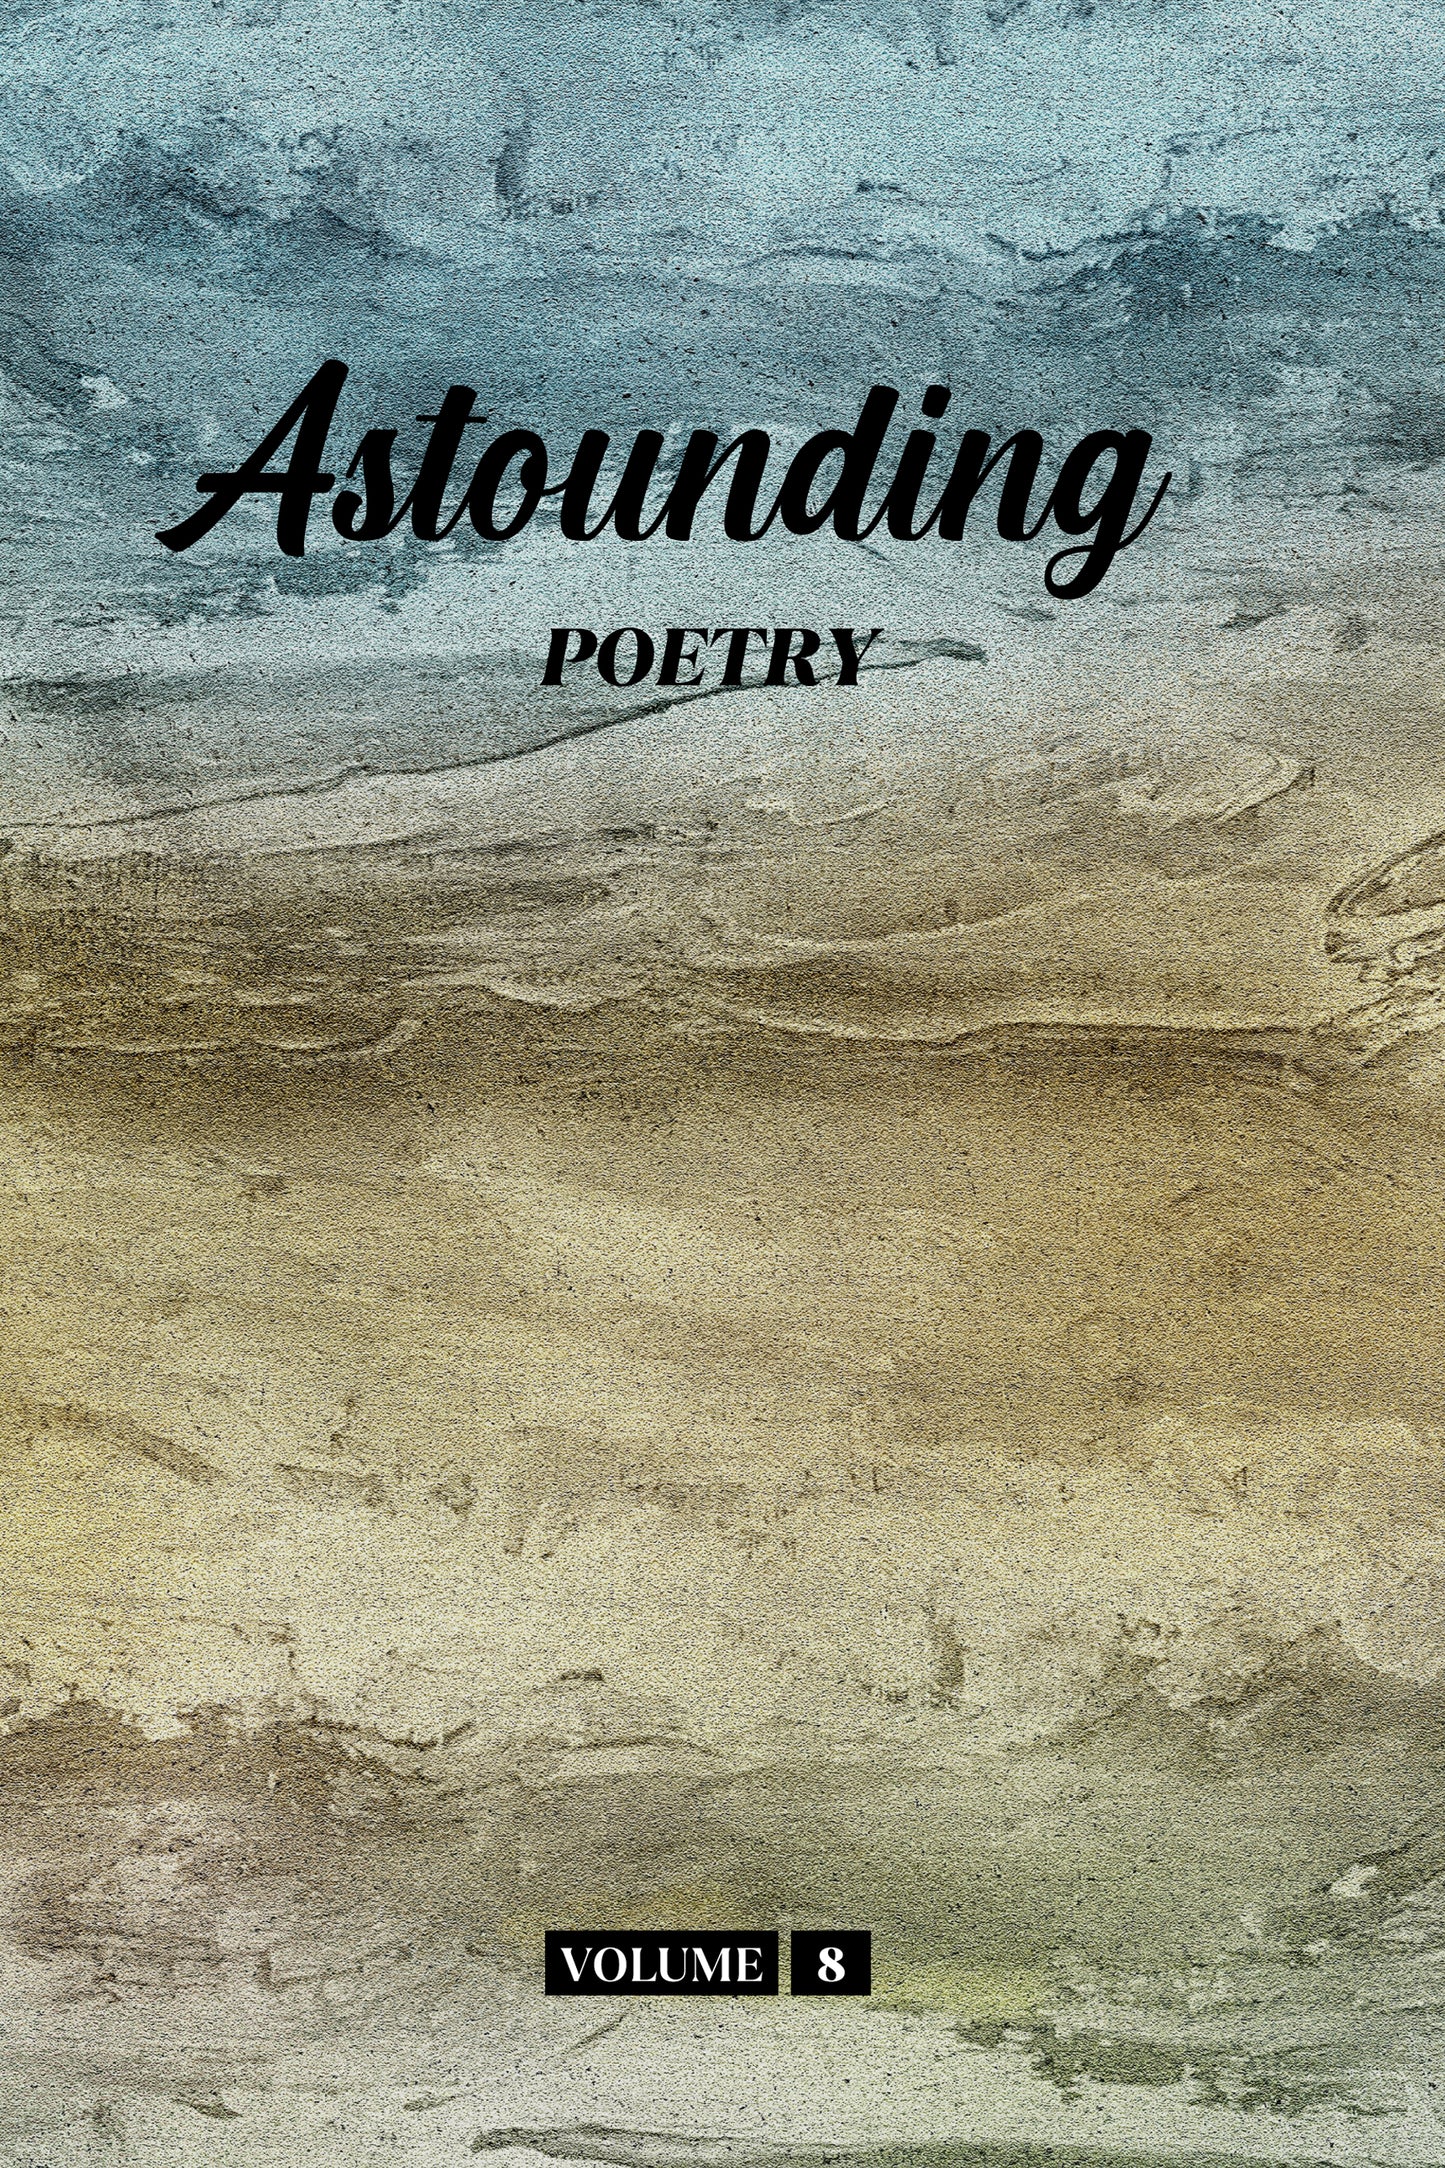 Astounding Poetry (Volume 8) - Physical Book